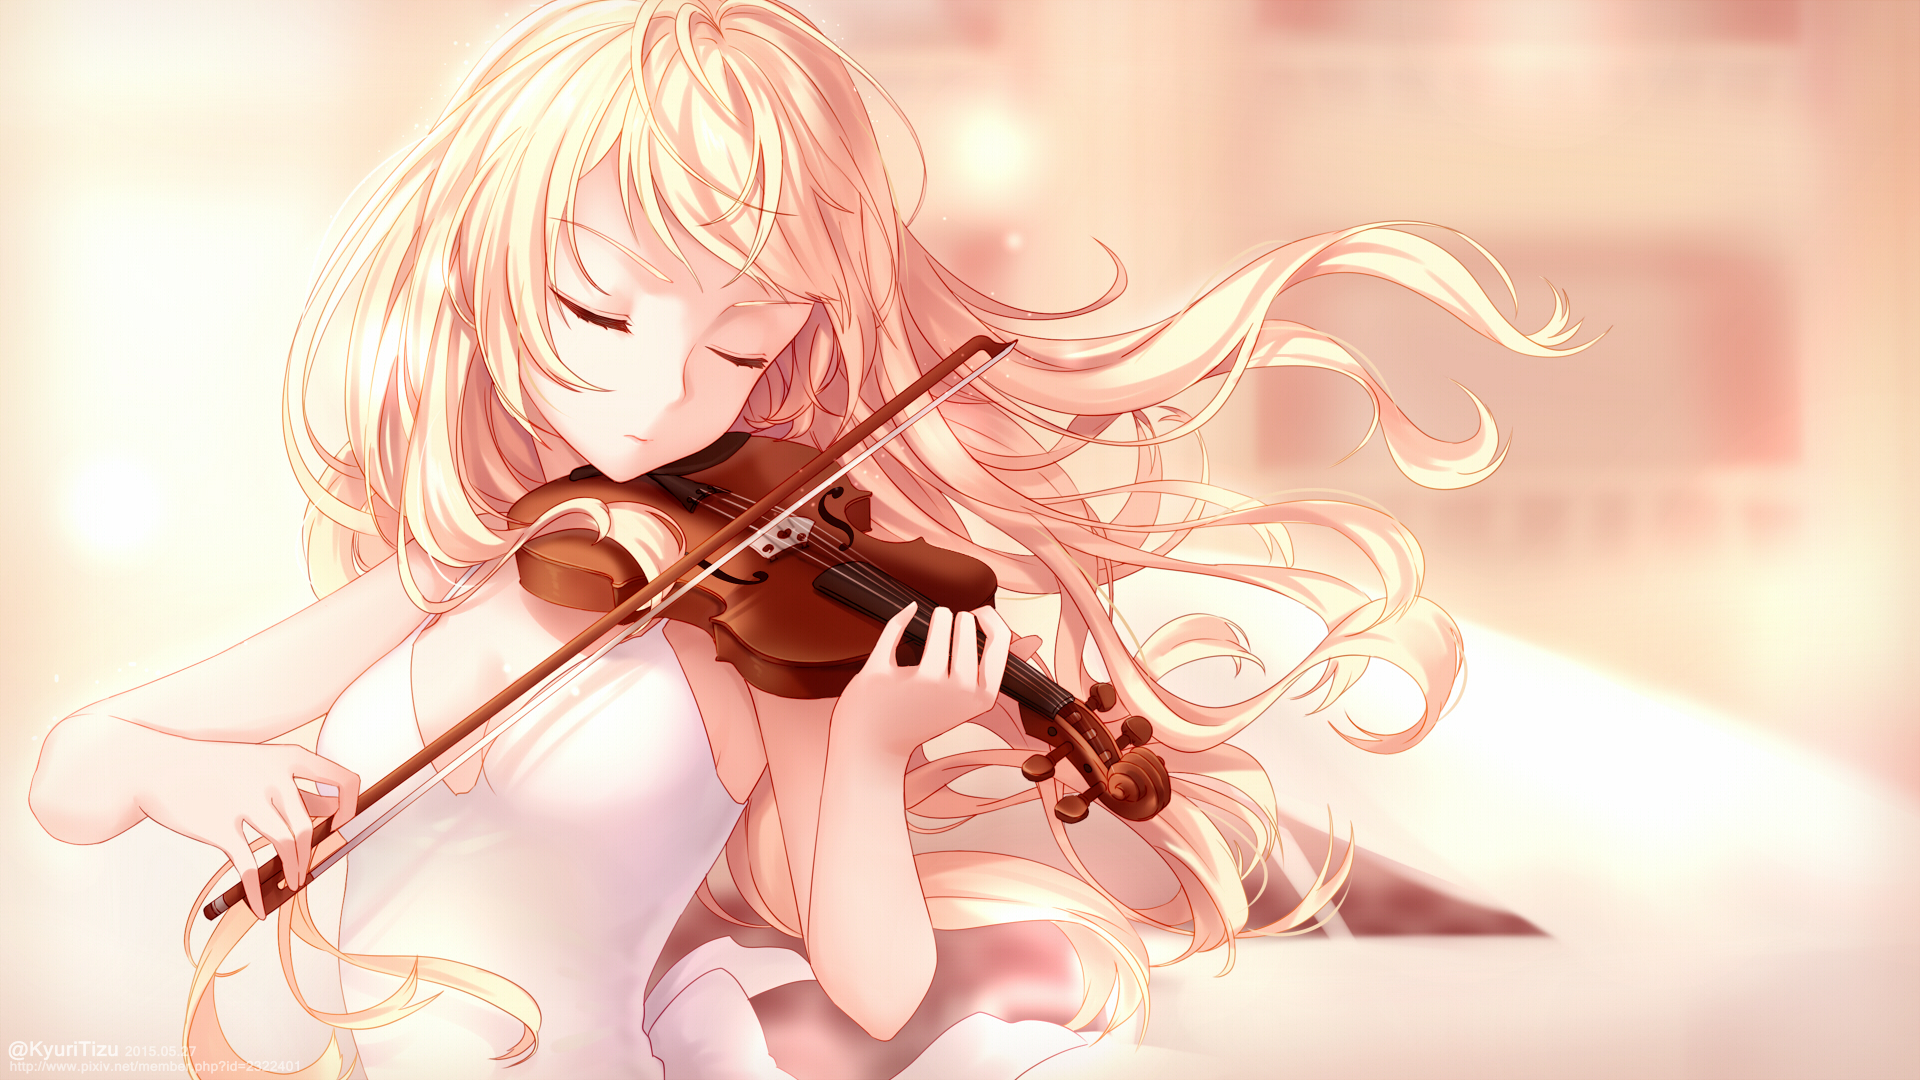 Anime Your Lie in April HD Wallpaper by KyuriTizu